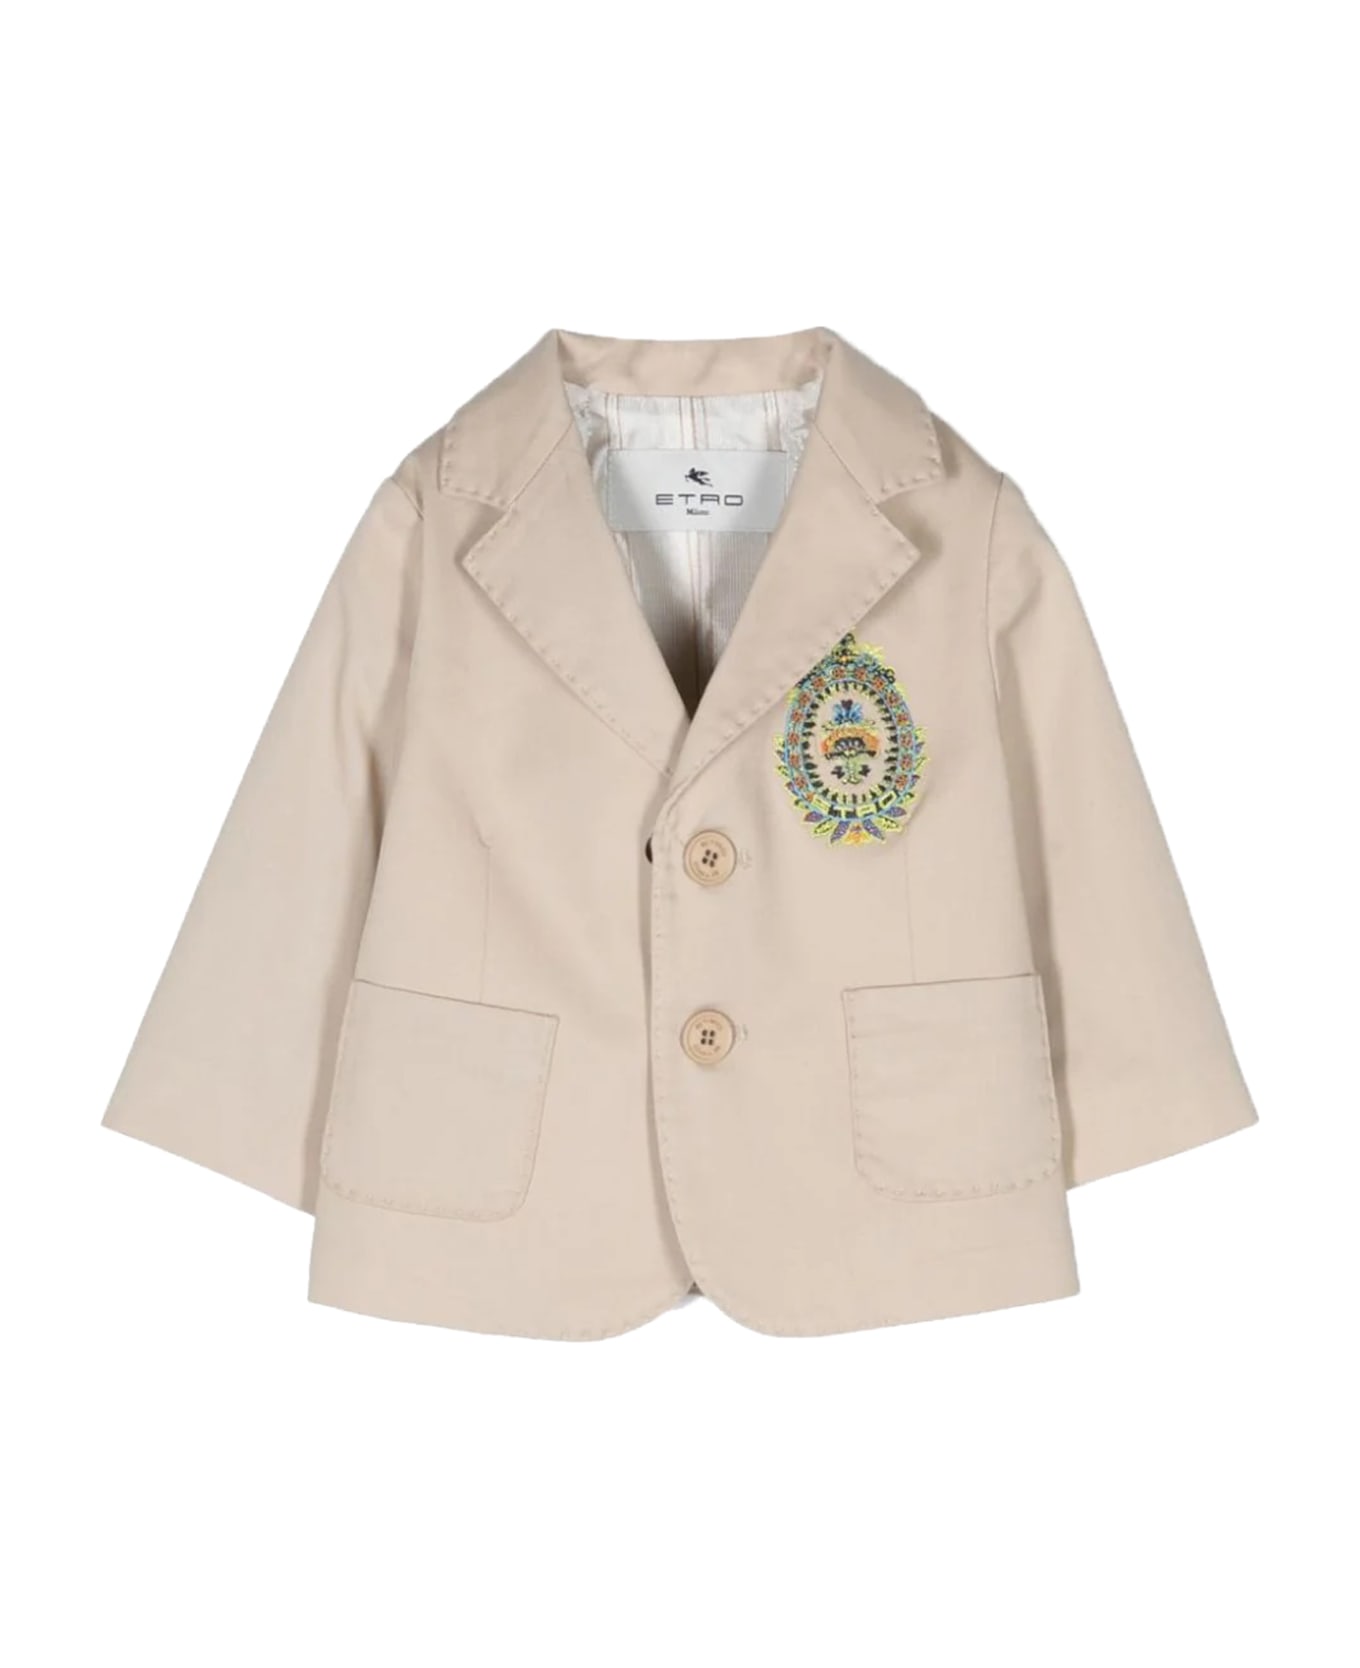 Etro Jacket With Embroidered Heraldic Coat Of Arms - Beige